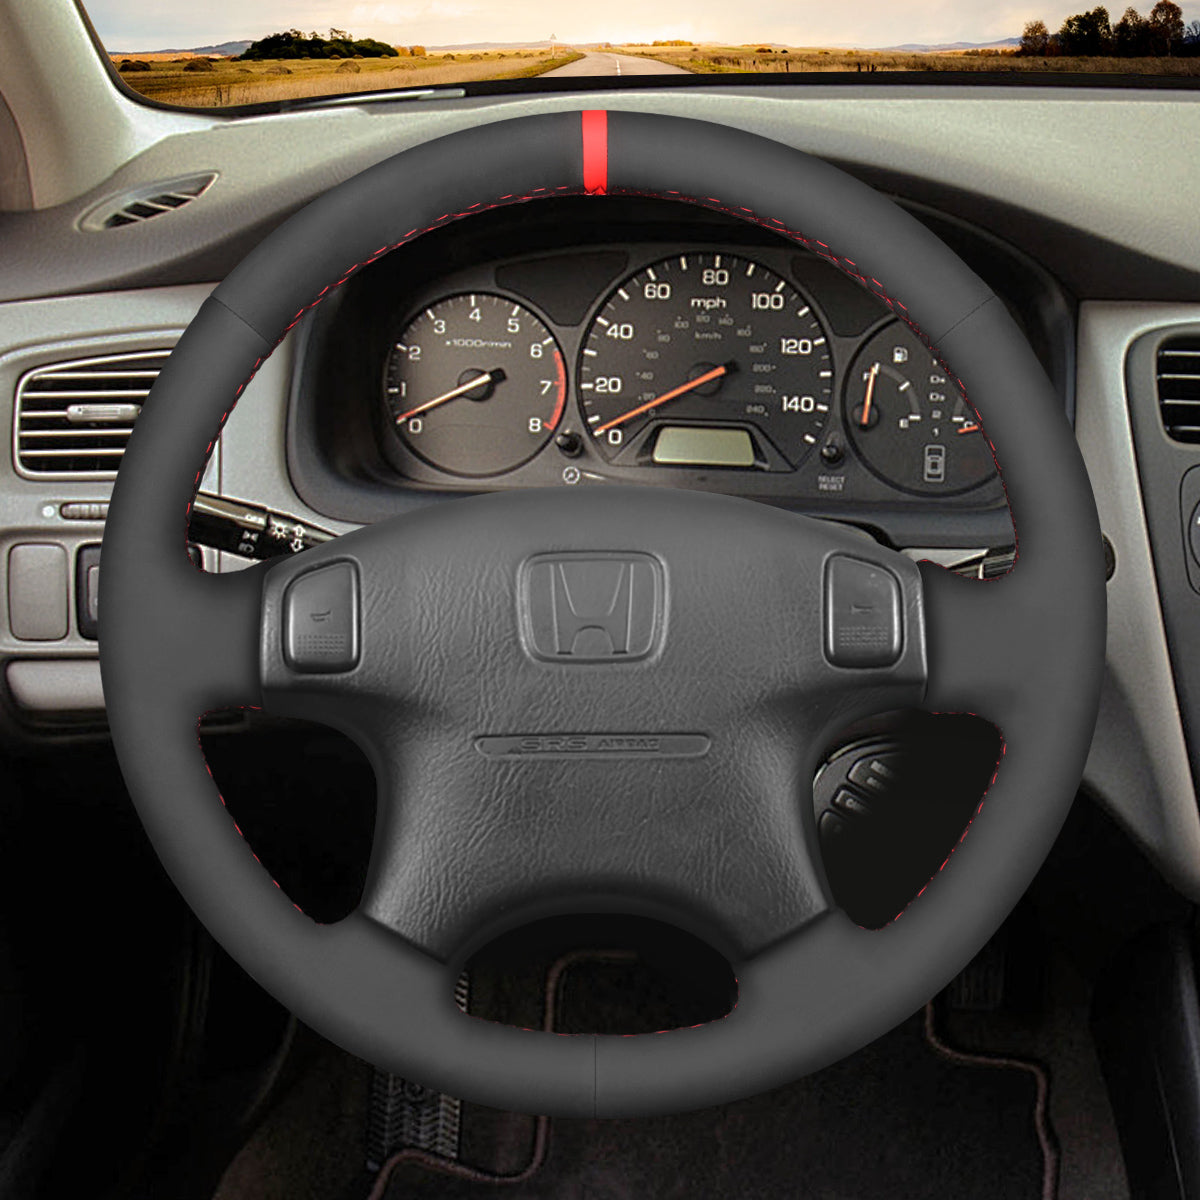 MEWANT Black Leather Suede Car Steering Wheel Cover for Honda Civic 1996-2000 / CR-V CRV 1997-2001 / Prelude 1997-2001